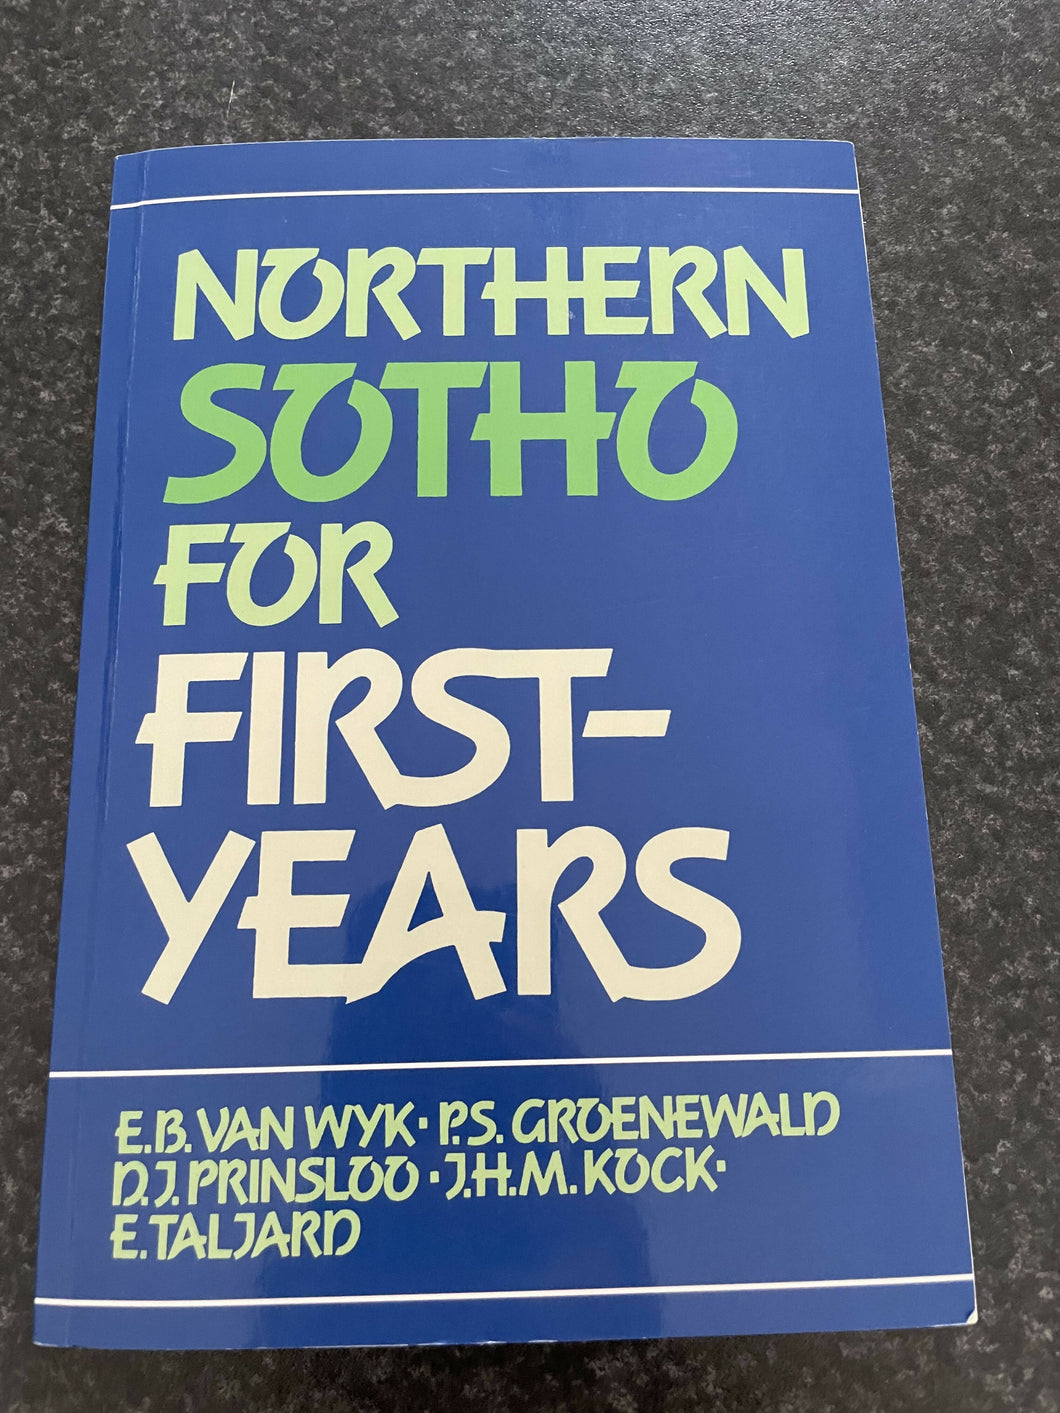 Northern Sotho for first years